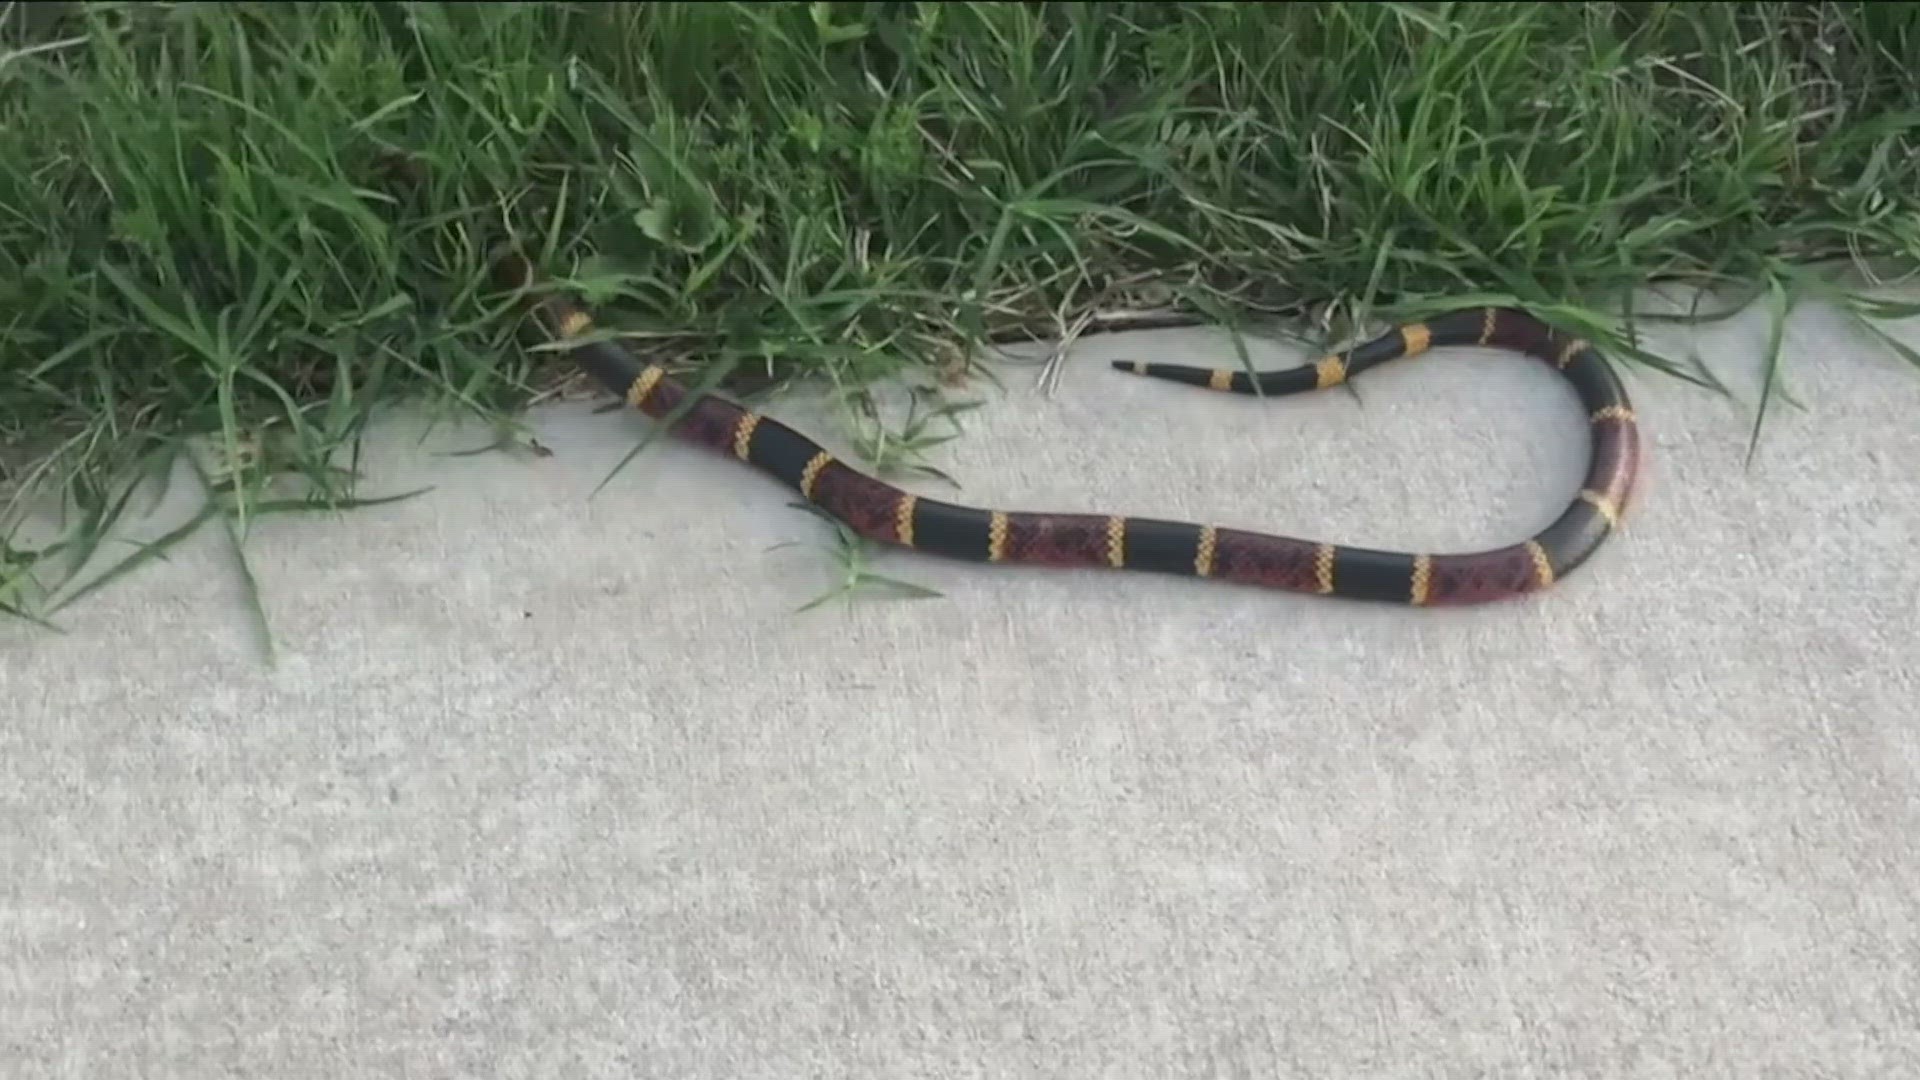 Texans have encountered our state's most notorious snake in some unexpected places.